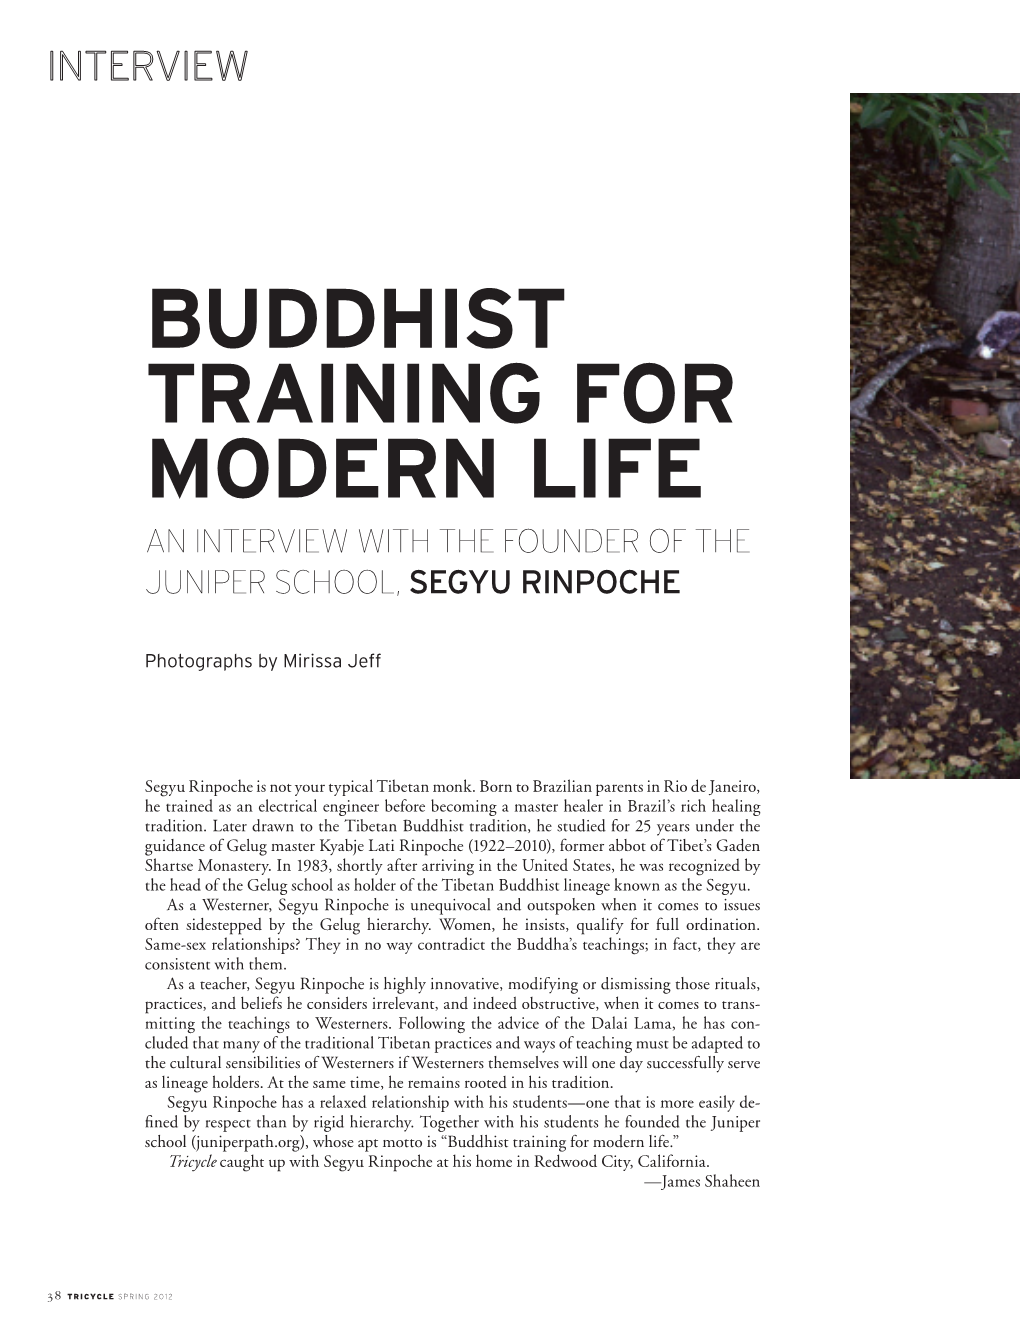 Buddhist Training for Modern Life an Interview with the Founder of the Juniper School, Segyu Rinpoche